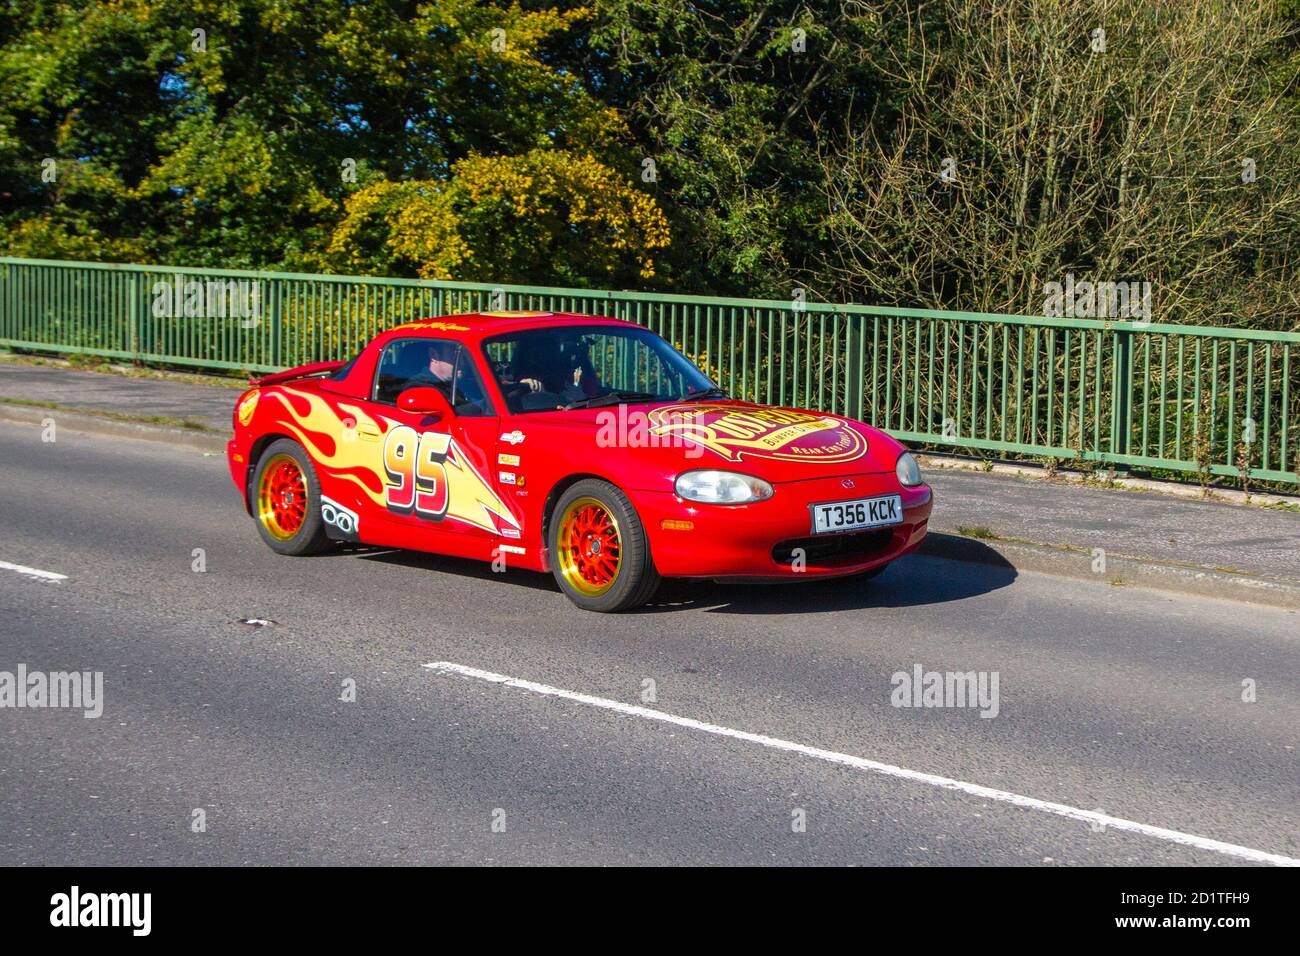 Red 1840cc 1999 90s nineties petrol roadster, red flame decals on customised MAZDA Mx-5 Sports car in motion crossing motorway bridge near Manchester, UK Stock Photo